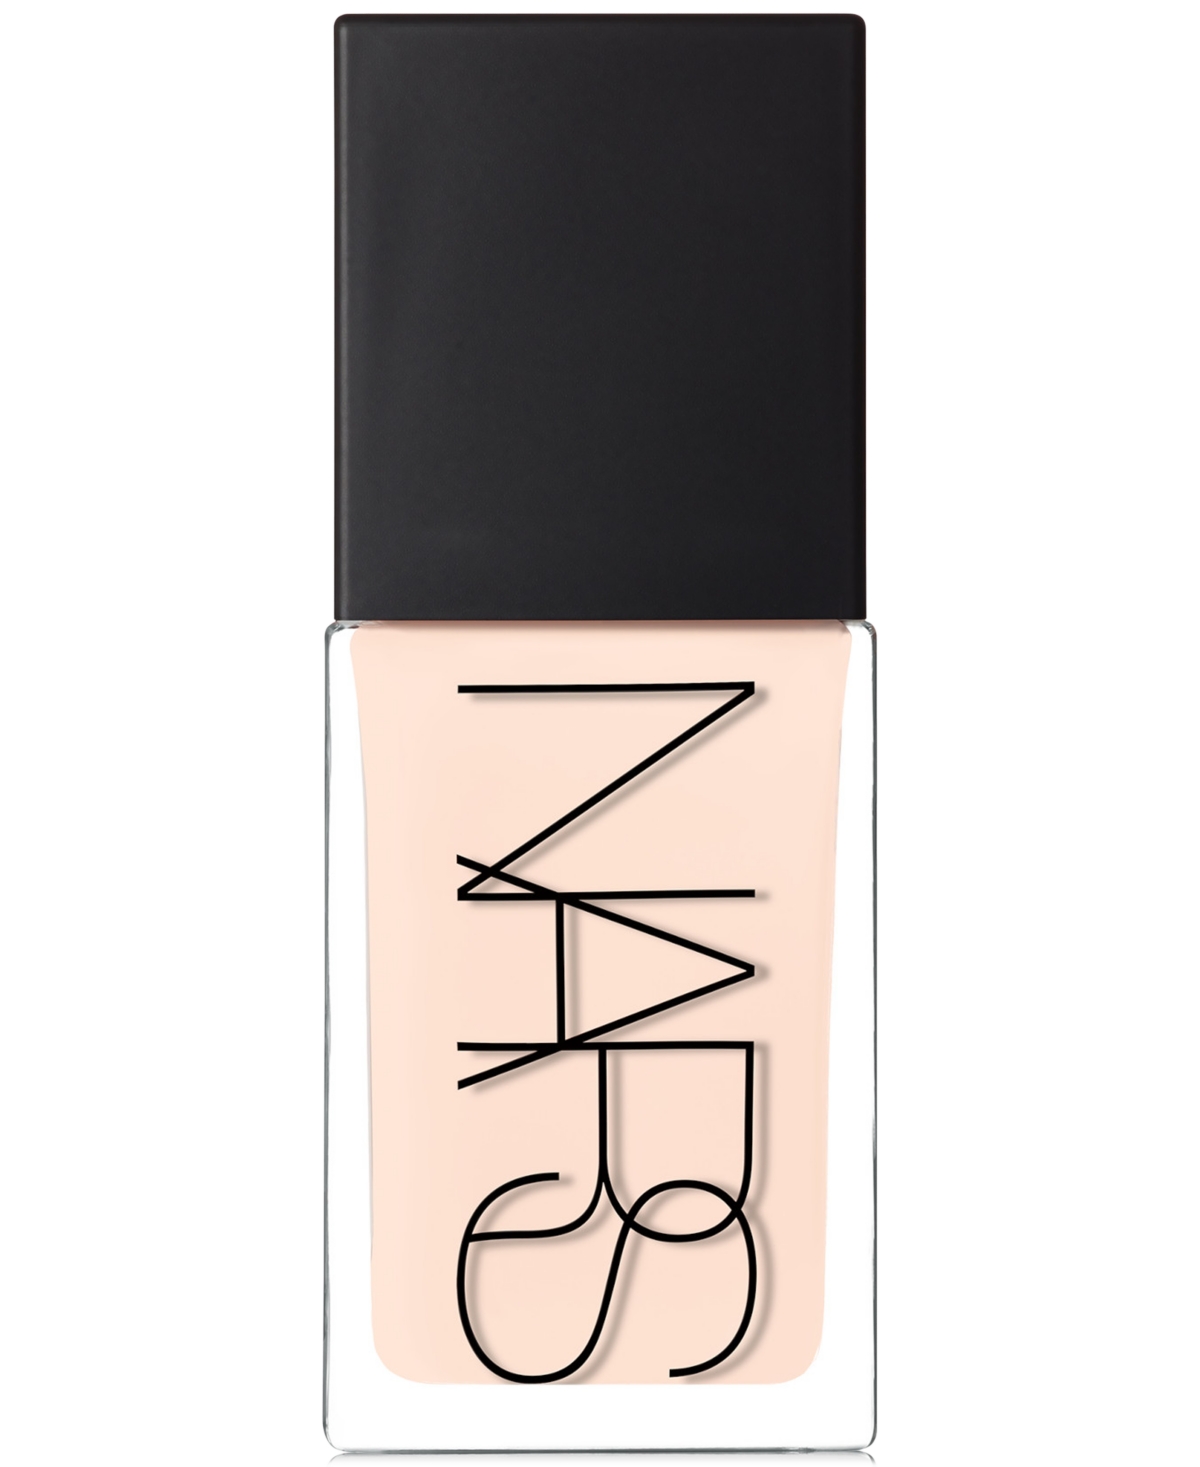 Nars Light Reflecting Foundation In Oslo (l - Very Light With Cool Undertone